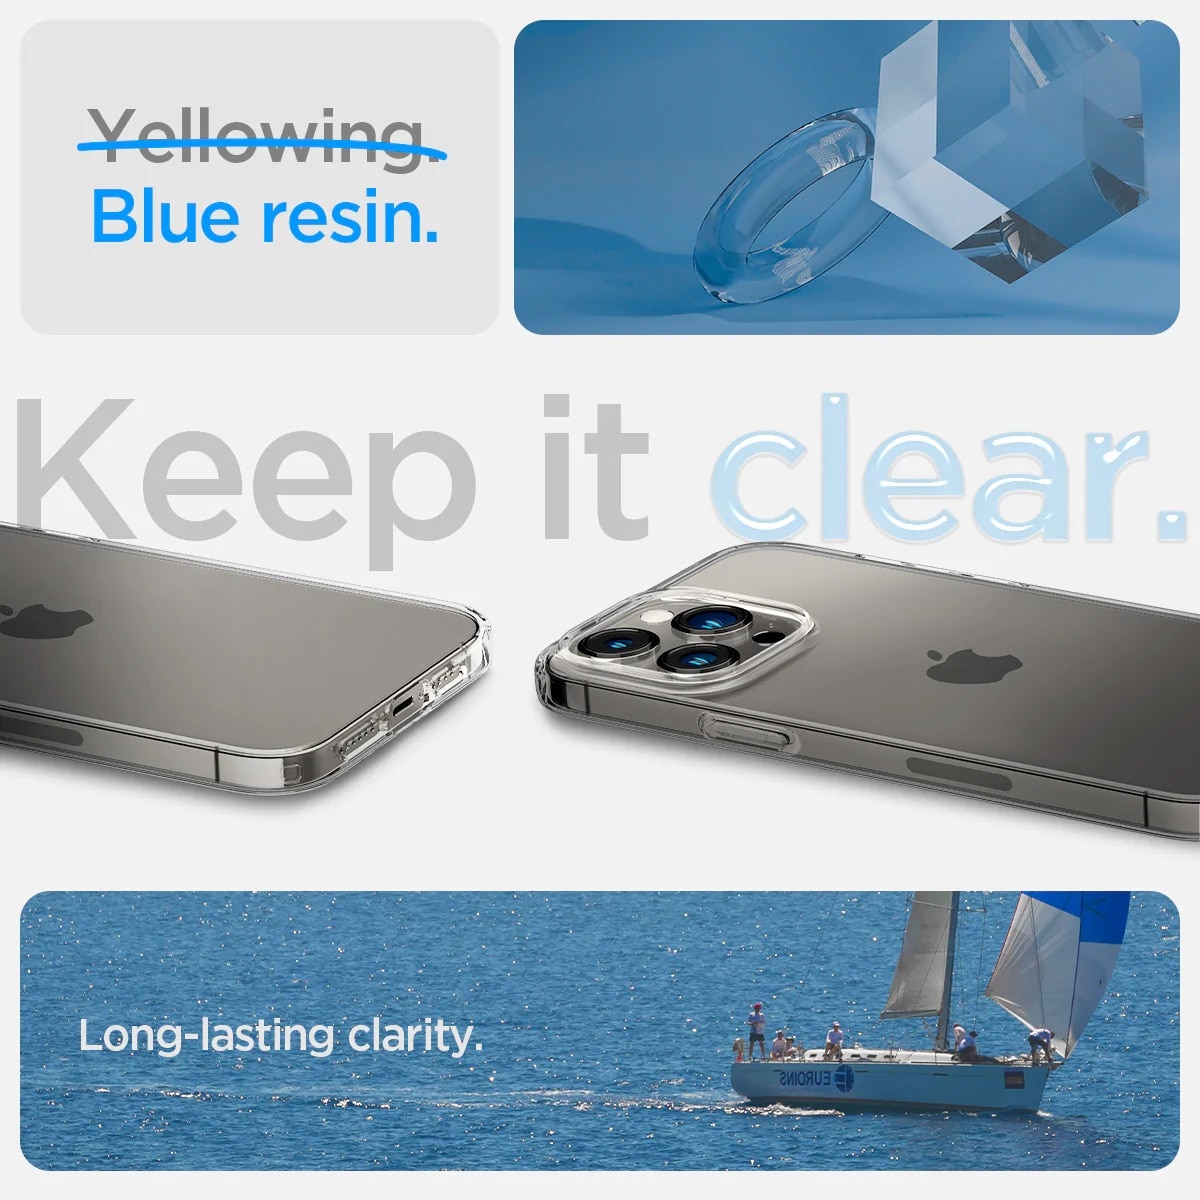 Case Liquid iPhone 14 Pro Crystal Clear